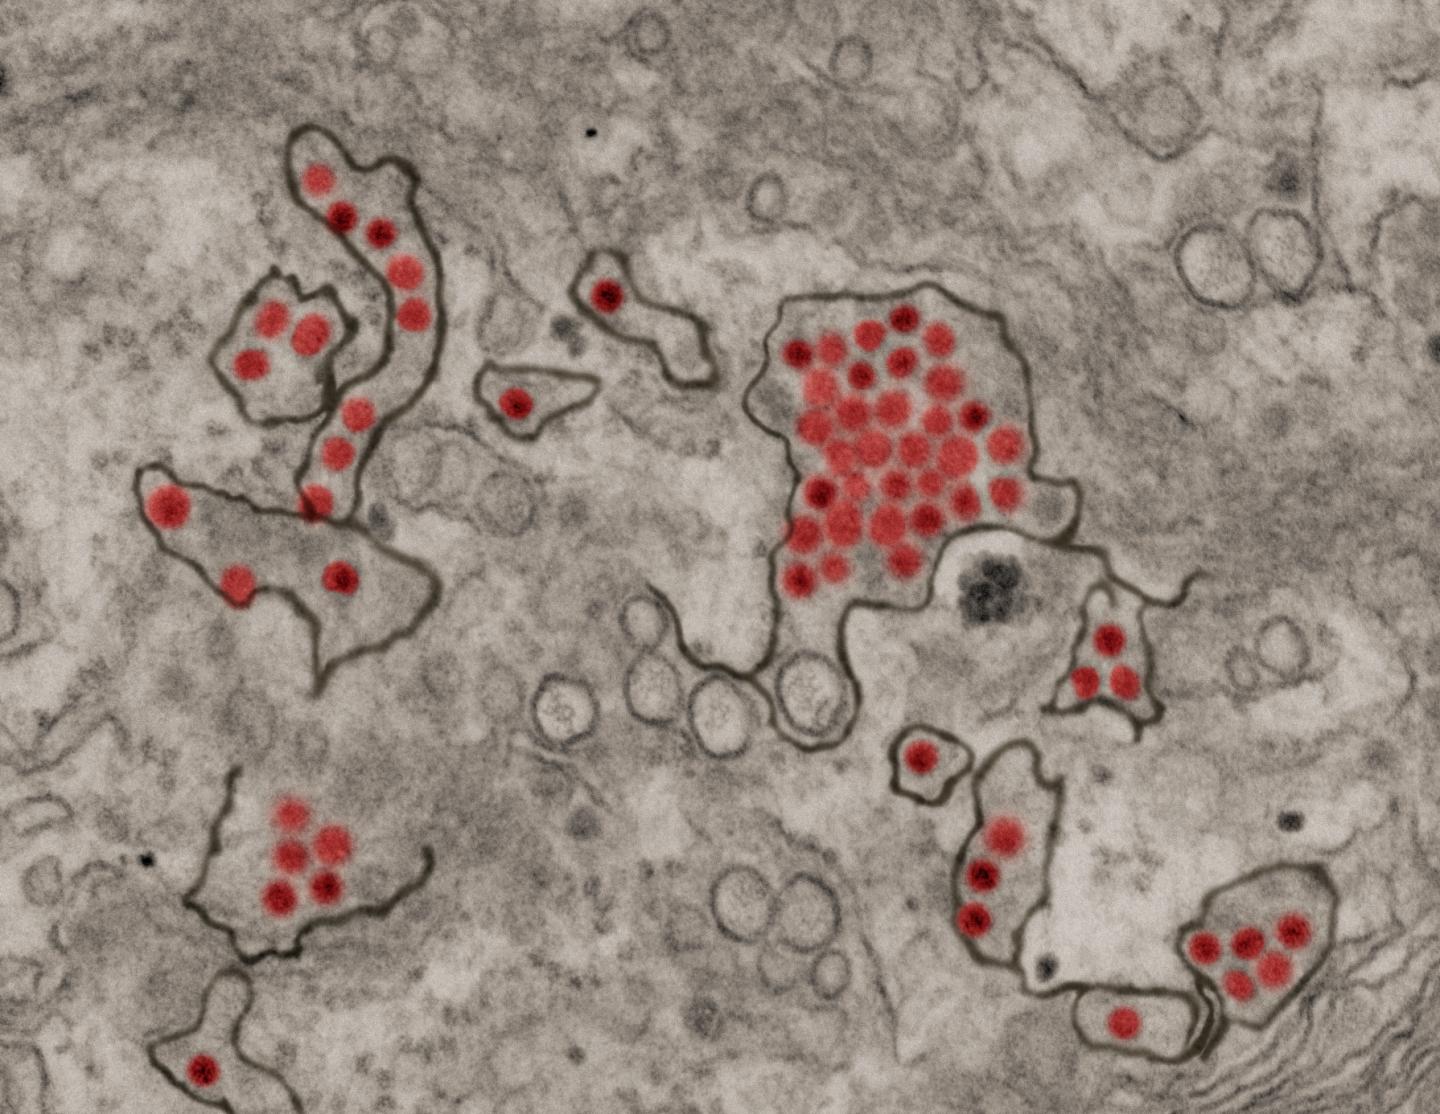 Zika Virus Particles (Red) Shown in African Green Monkey Kidney Cells